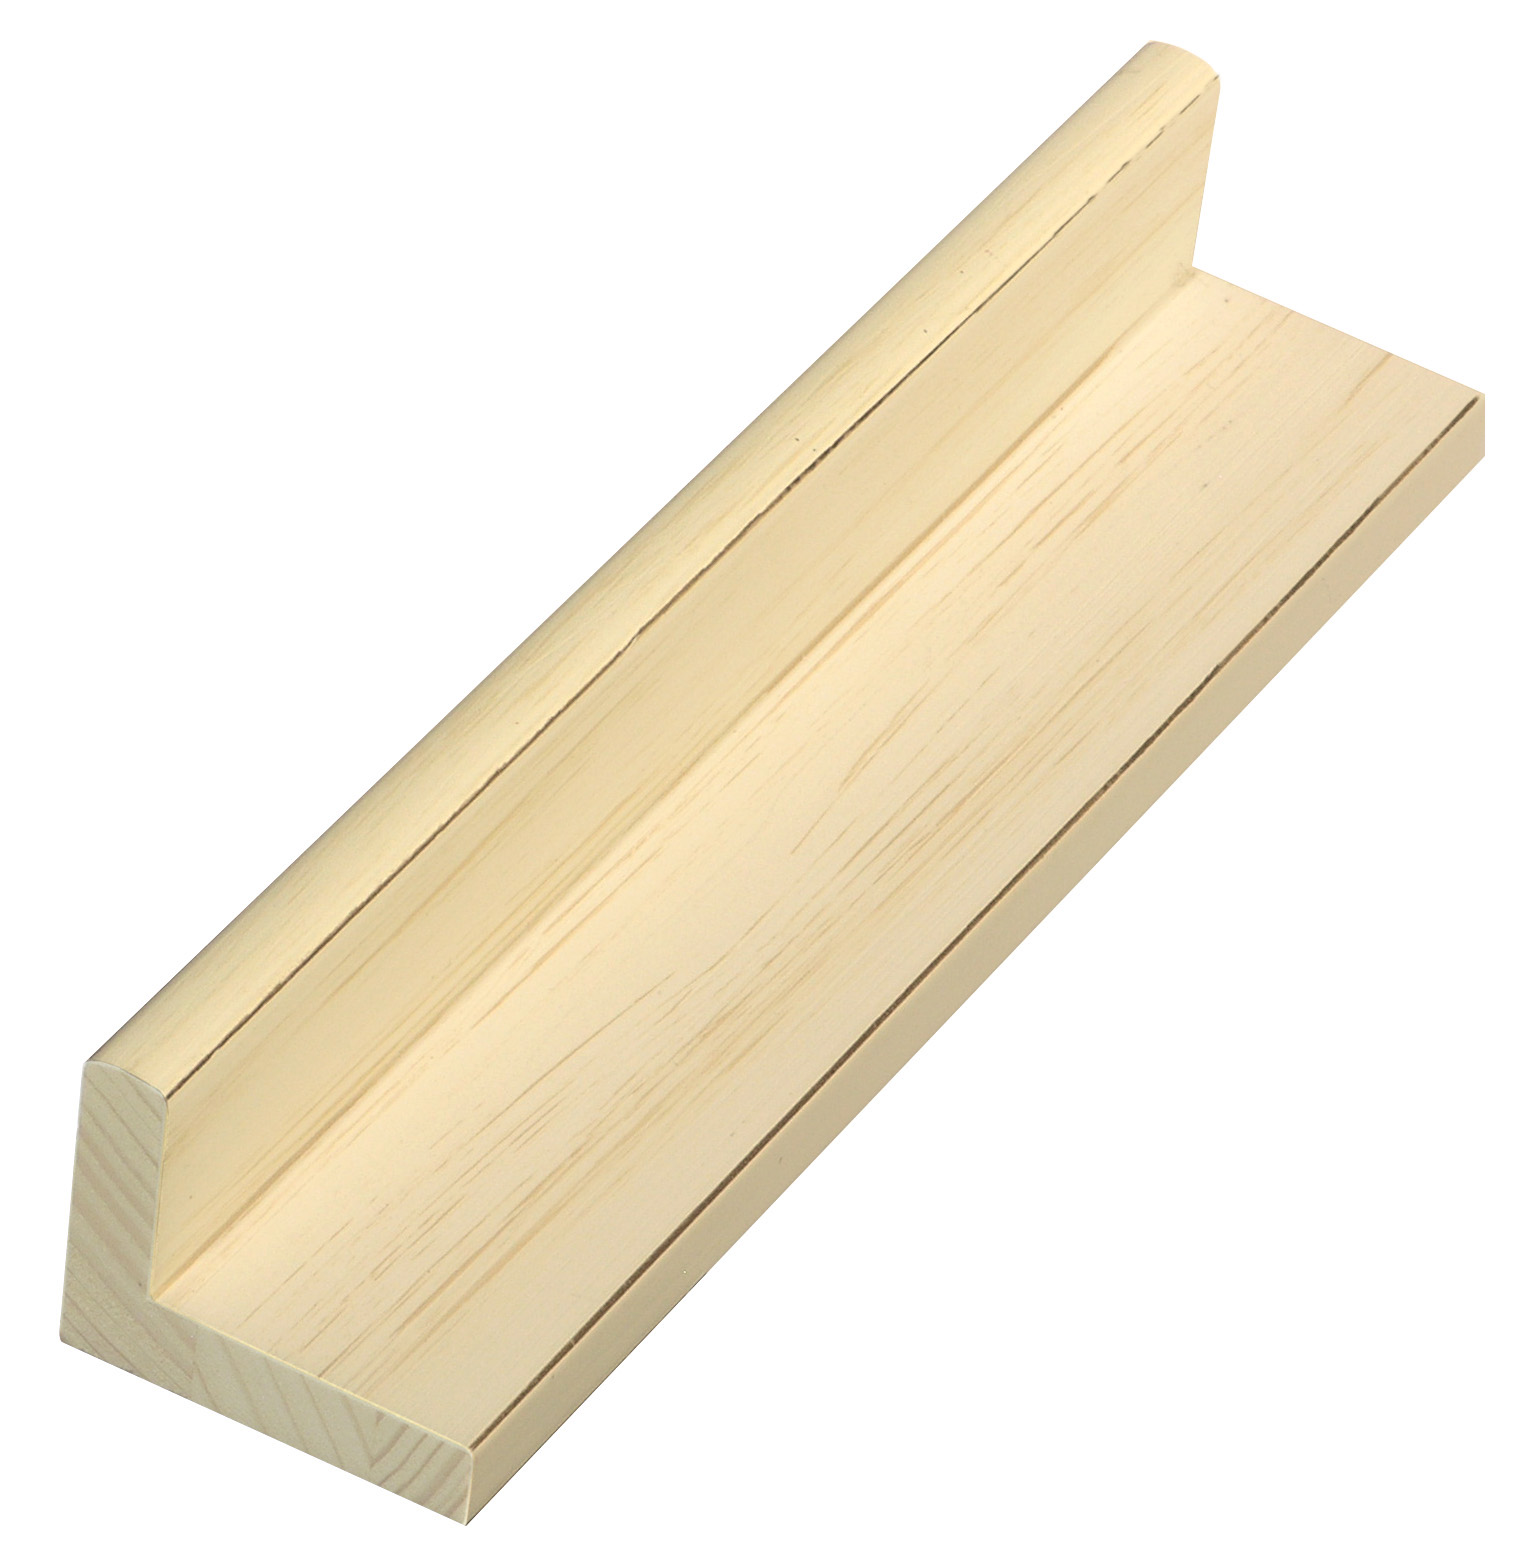 Moulding ayous L shape, Larg.mm44 Height 34 Natural wood